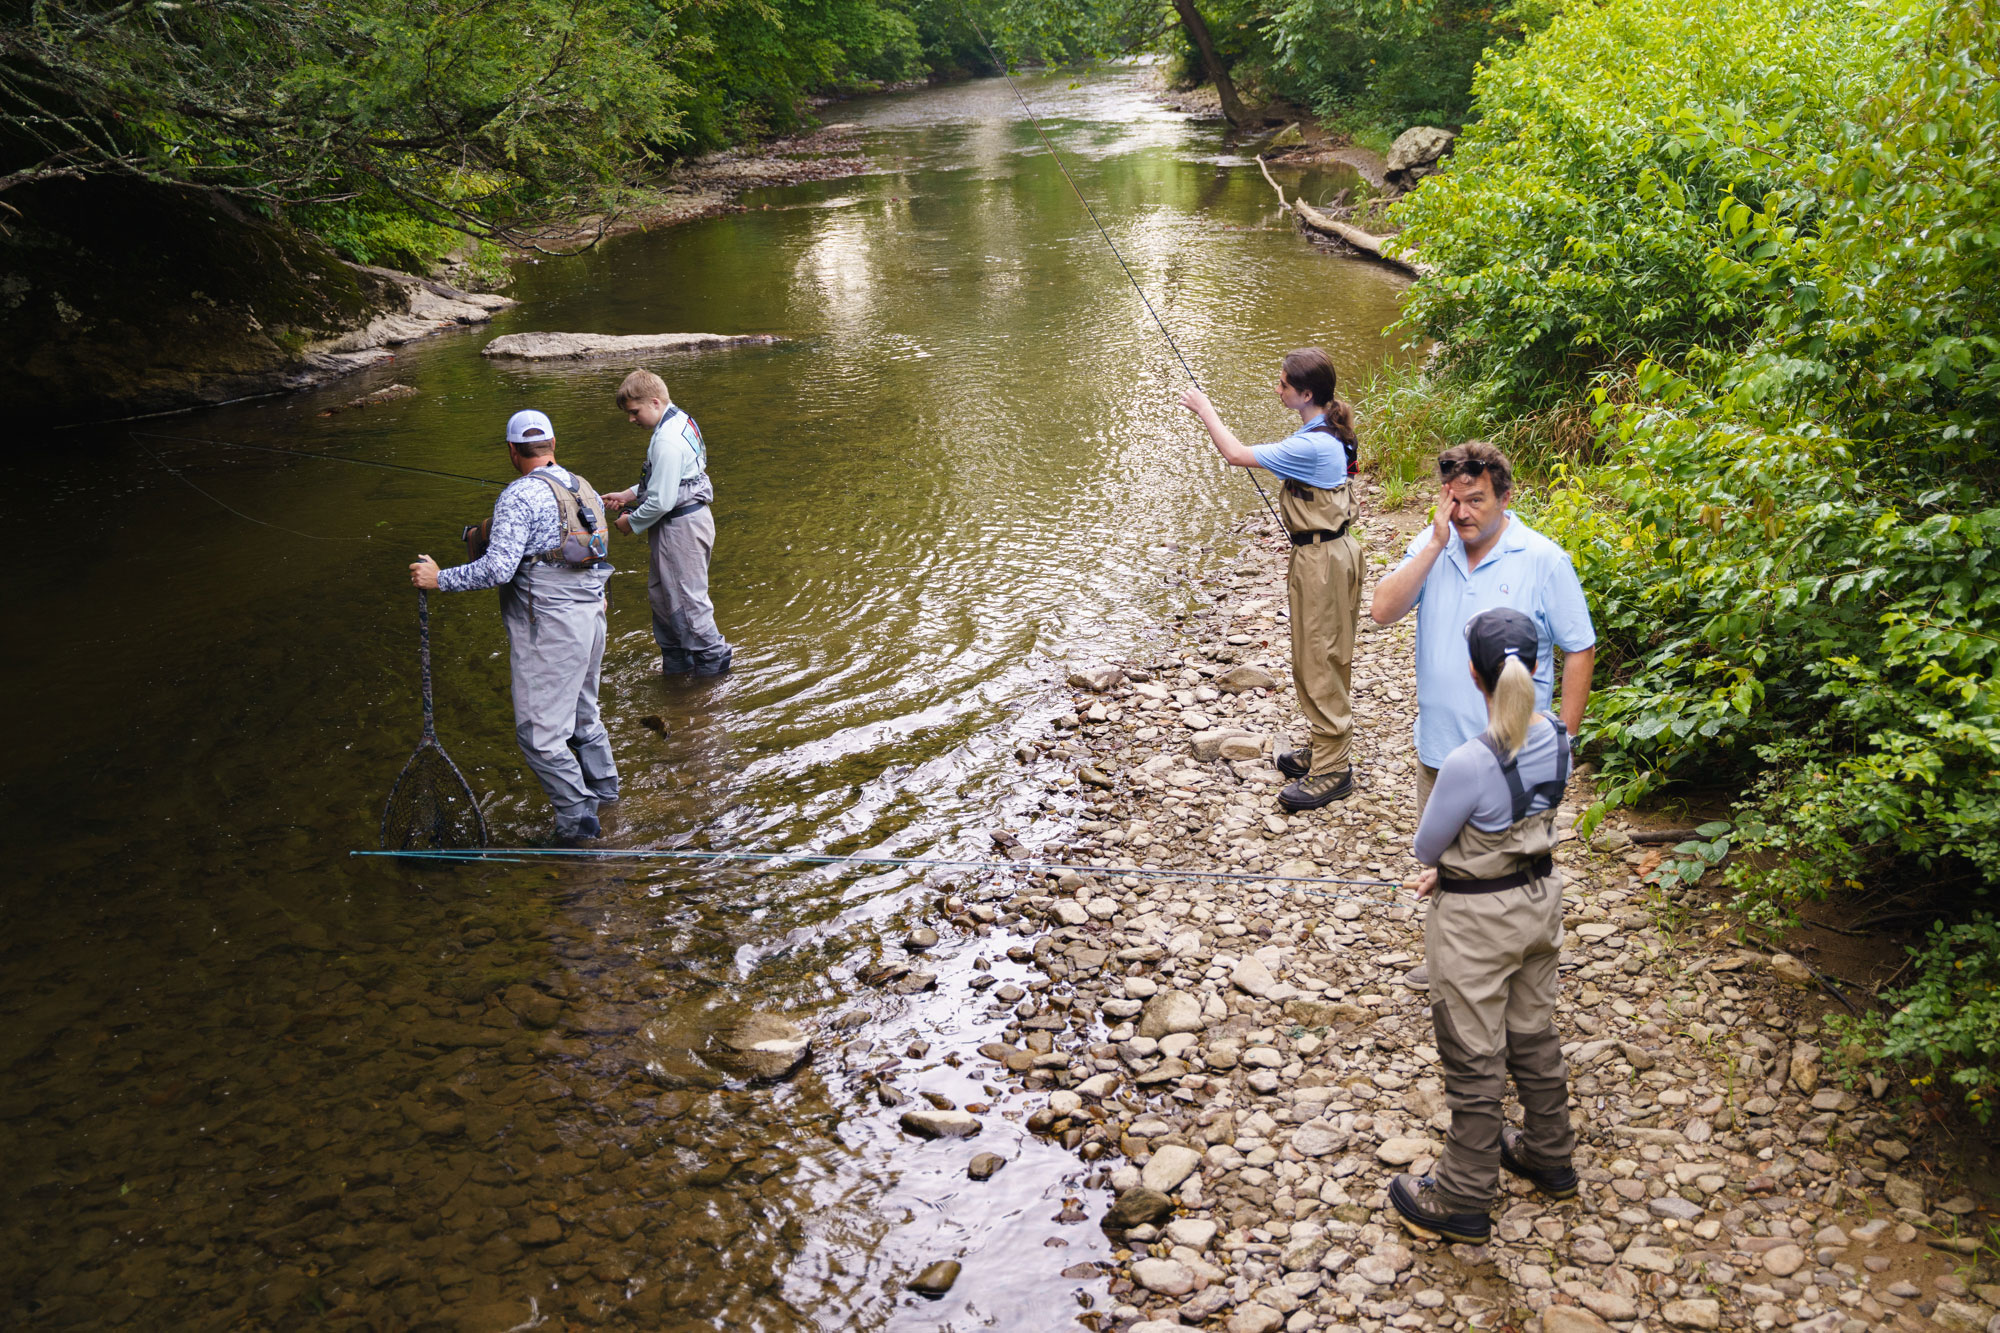 A group stands in and around a river casting their fishing lines